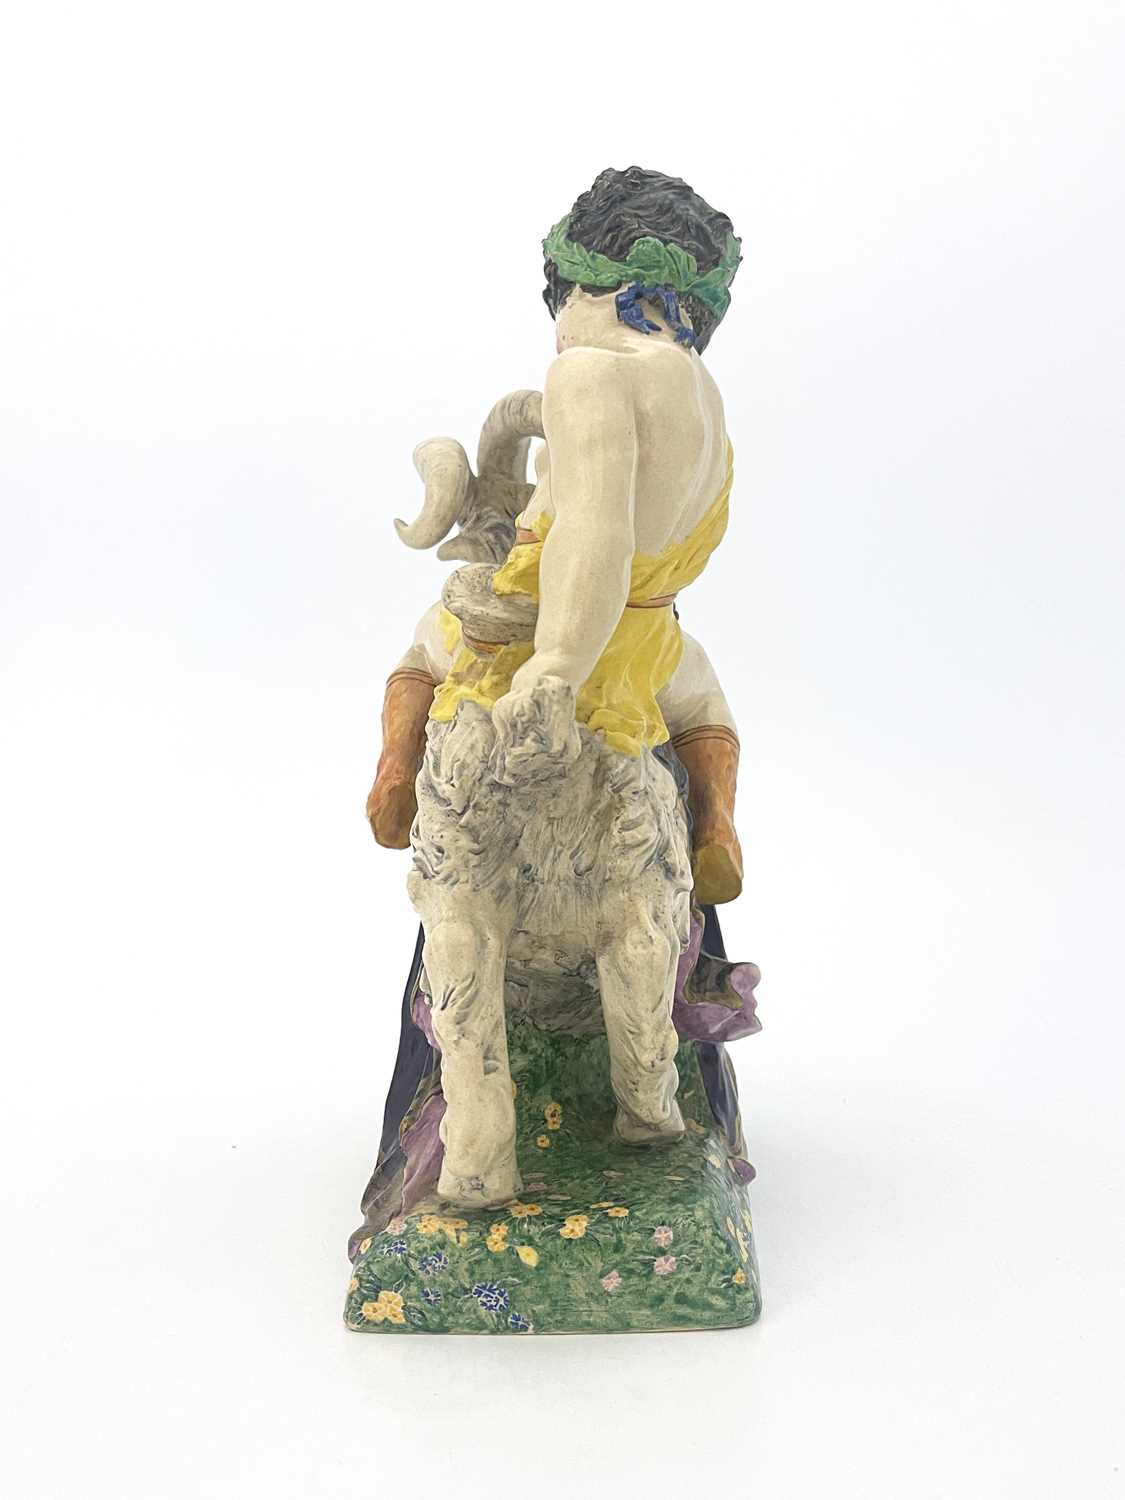 Charles Vyse for Chelsea Pottery, Bacchus on a Goat, 1921, modelled as a Classical boy on a - Image 3 of 9